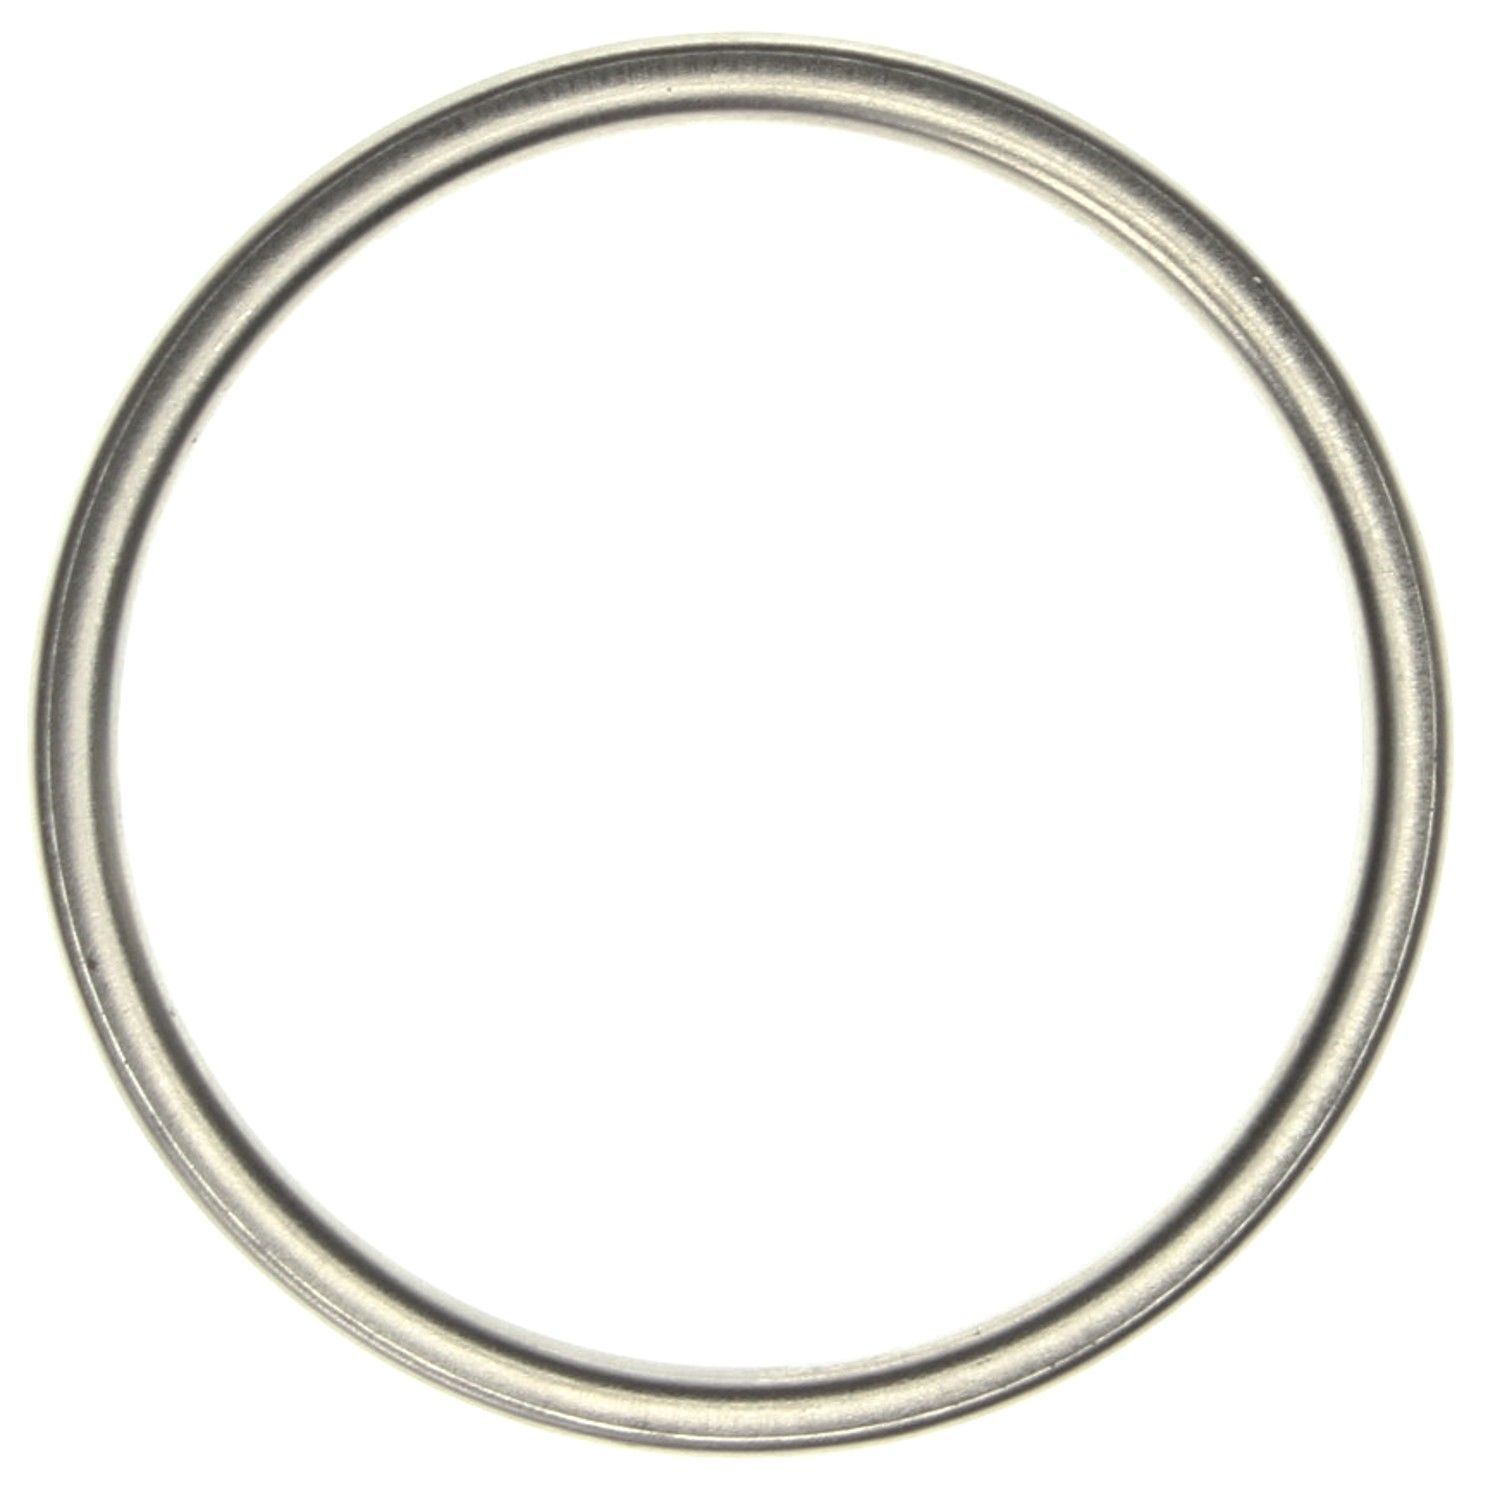 MAHLE ORIGINAL - Exhaust Pipe Flange Gasket - MHL F7282